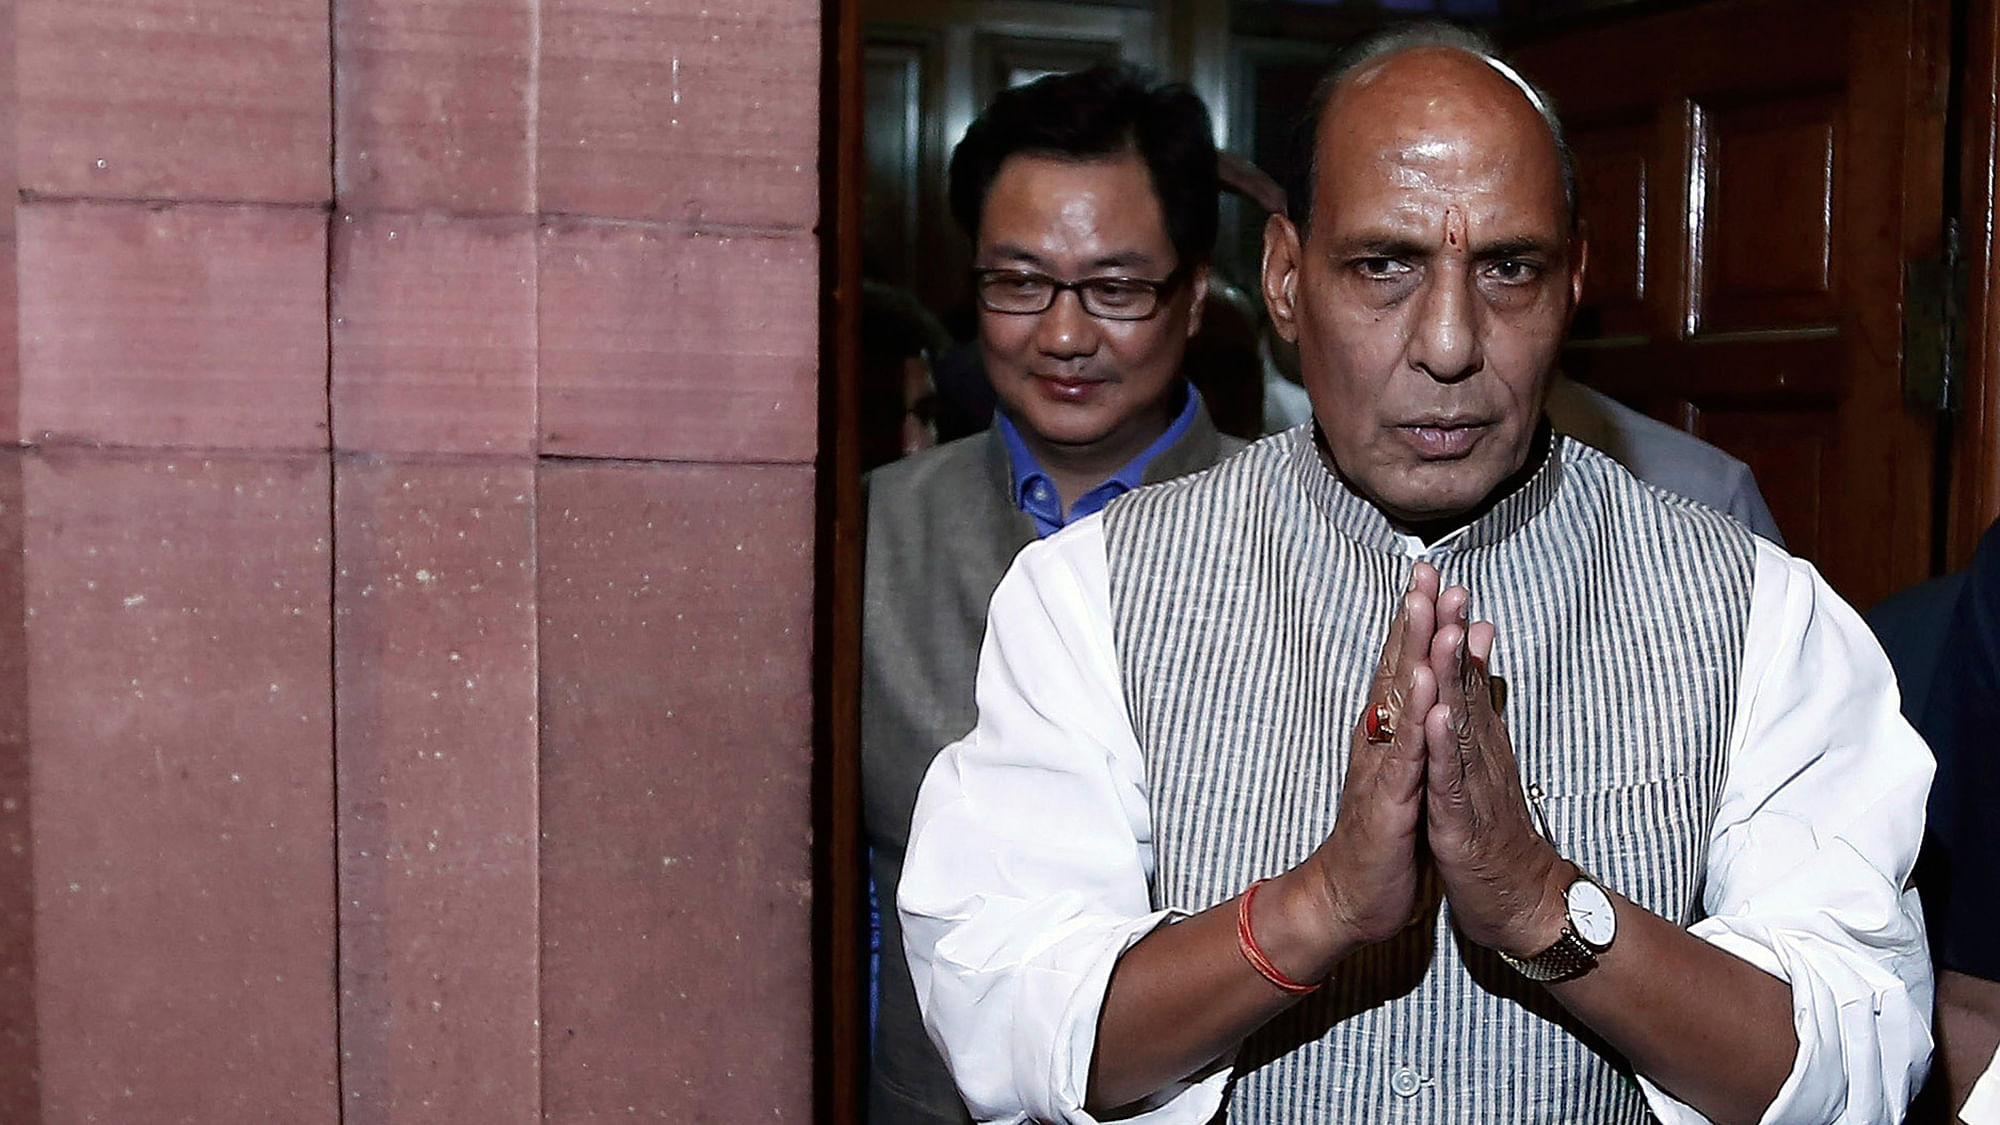 Home Minister Rajnath Singh was addressing an editors meet in Chandigarh. (Photo: Reuters)